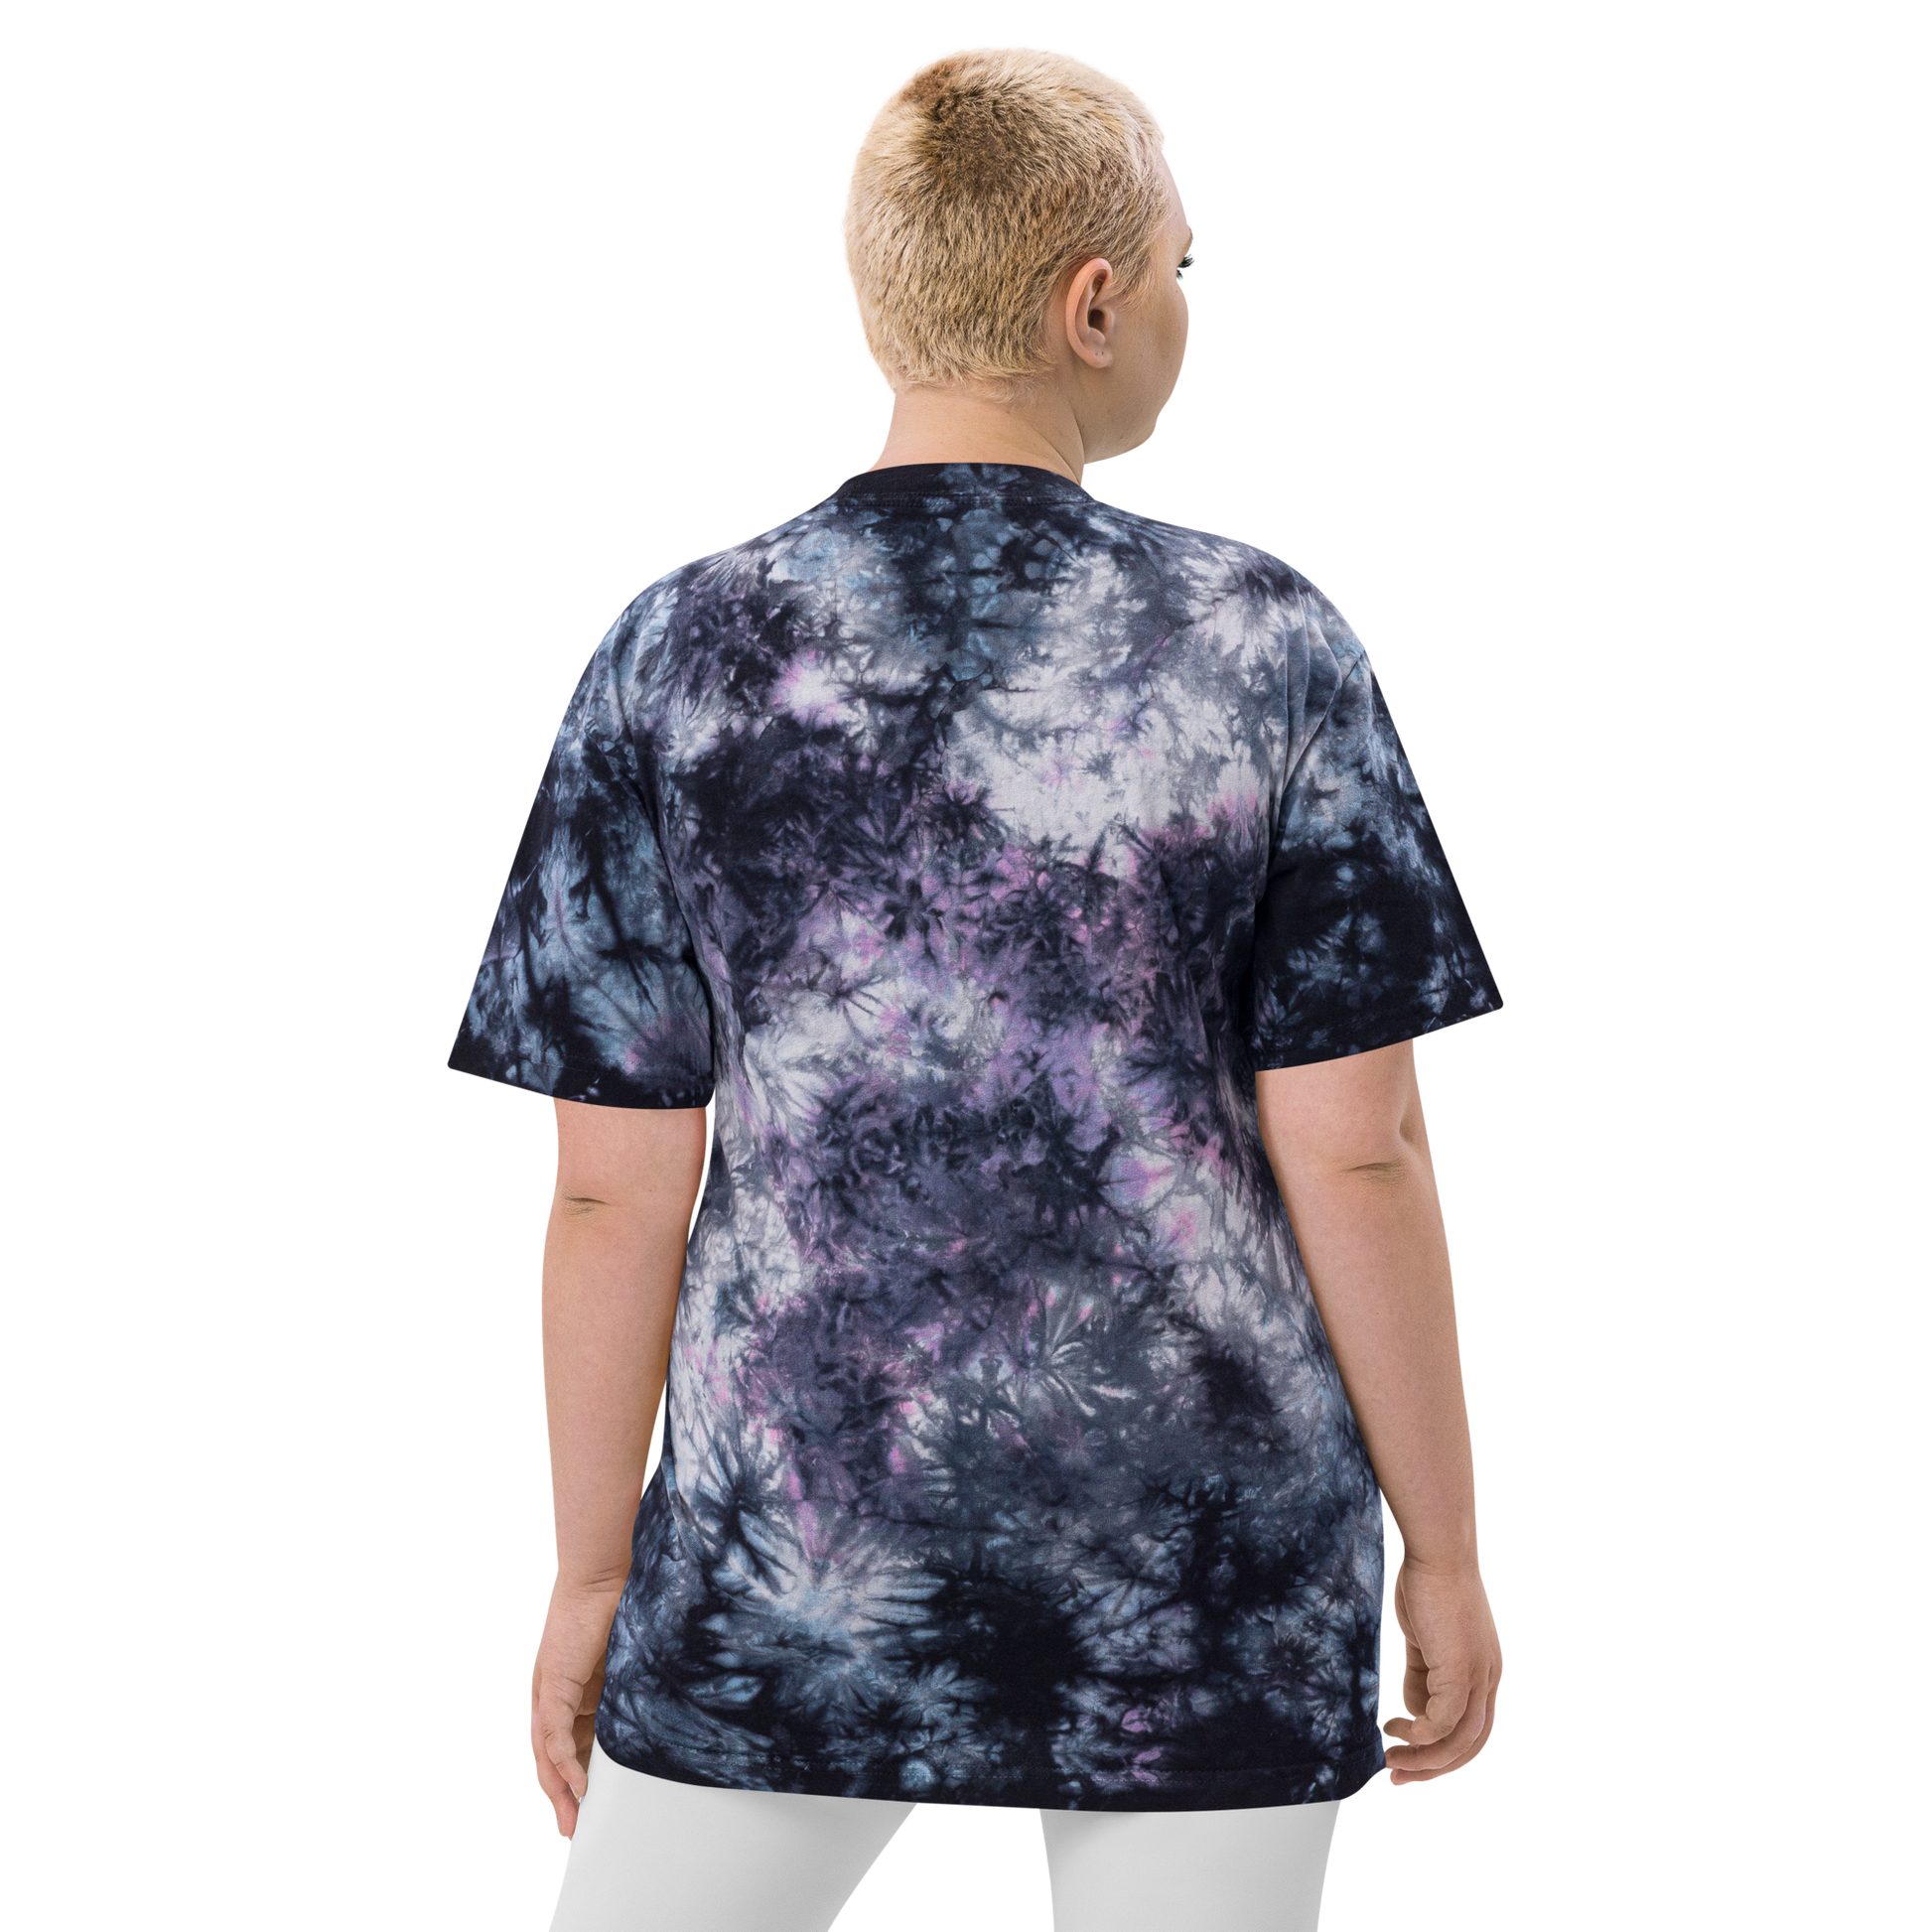 YHM Designs - YUL Montreal Oversized Tie-Dye T-Shirt - Crossed-X Design with Airport Code and Vintage Propliner - White Embroidery - Image 06